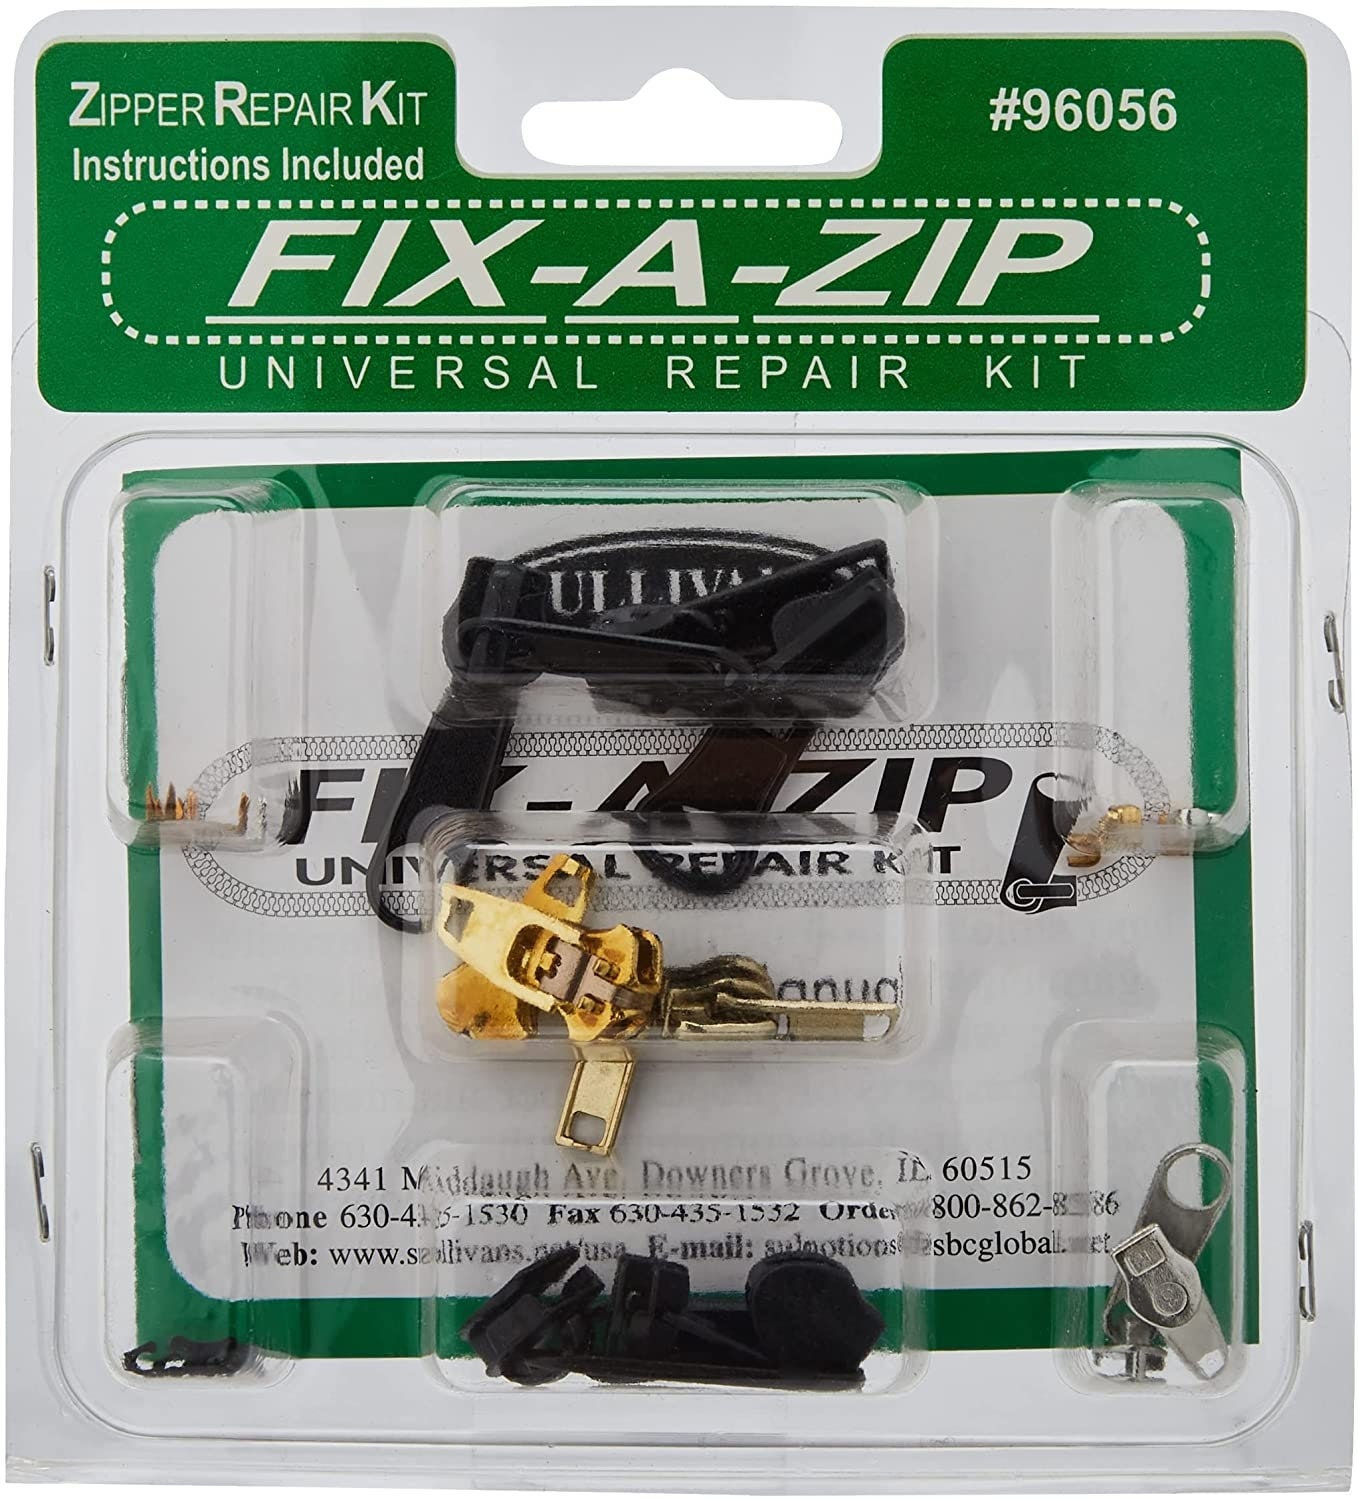 Zipperstop Zipper Repair Kit Vislon Plastic Universal Sliders With Top and  Bottom Stoppers Color Black -  Israel